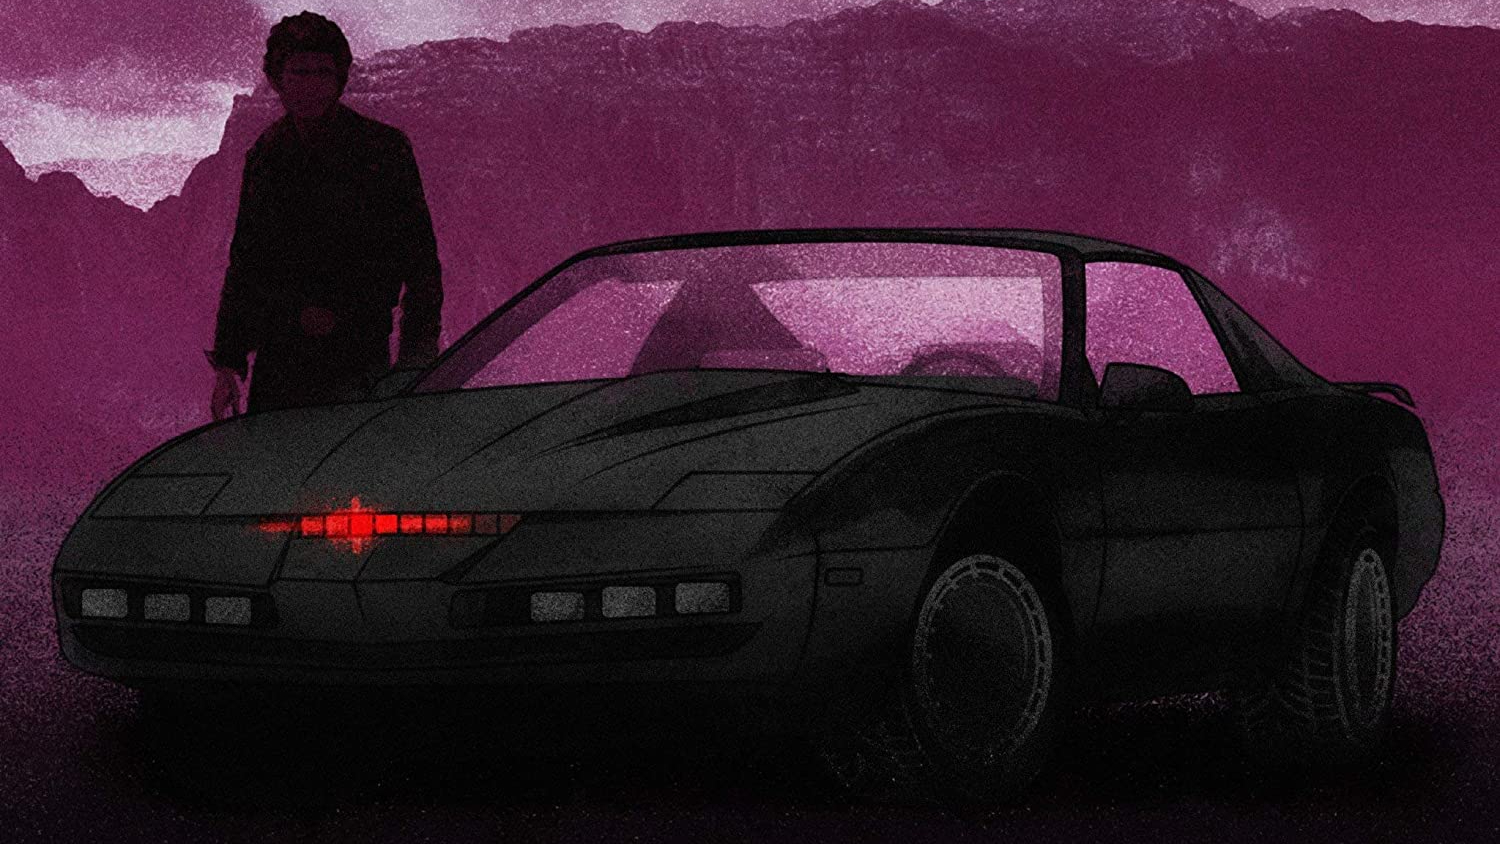 The Knight Rider Movie Will David Hasselhoff Come Back To This Franchise?